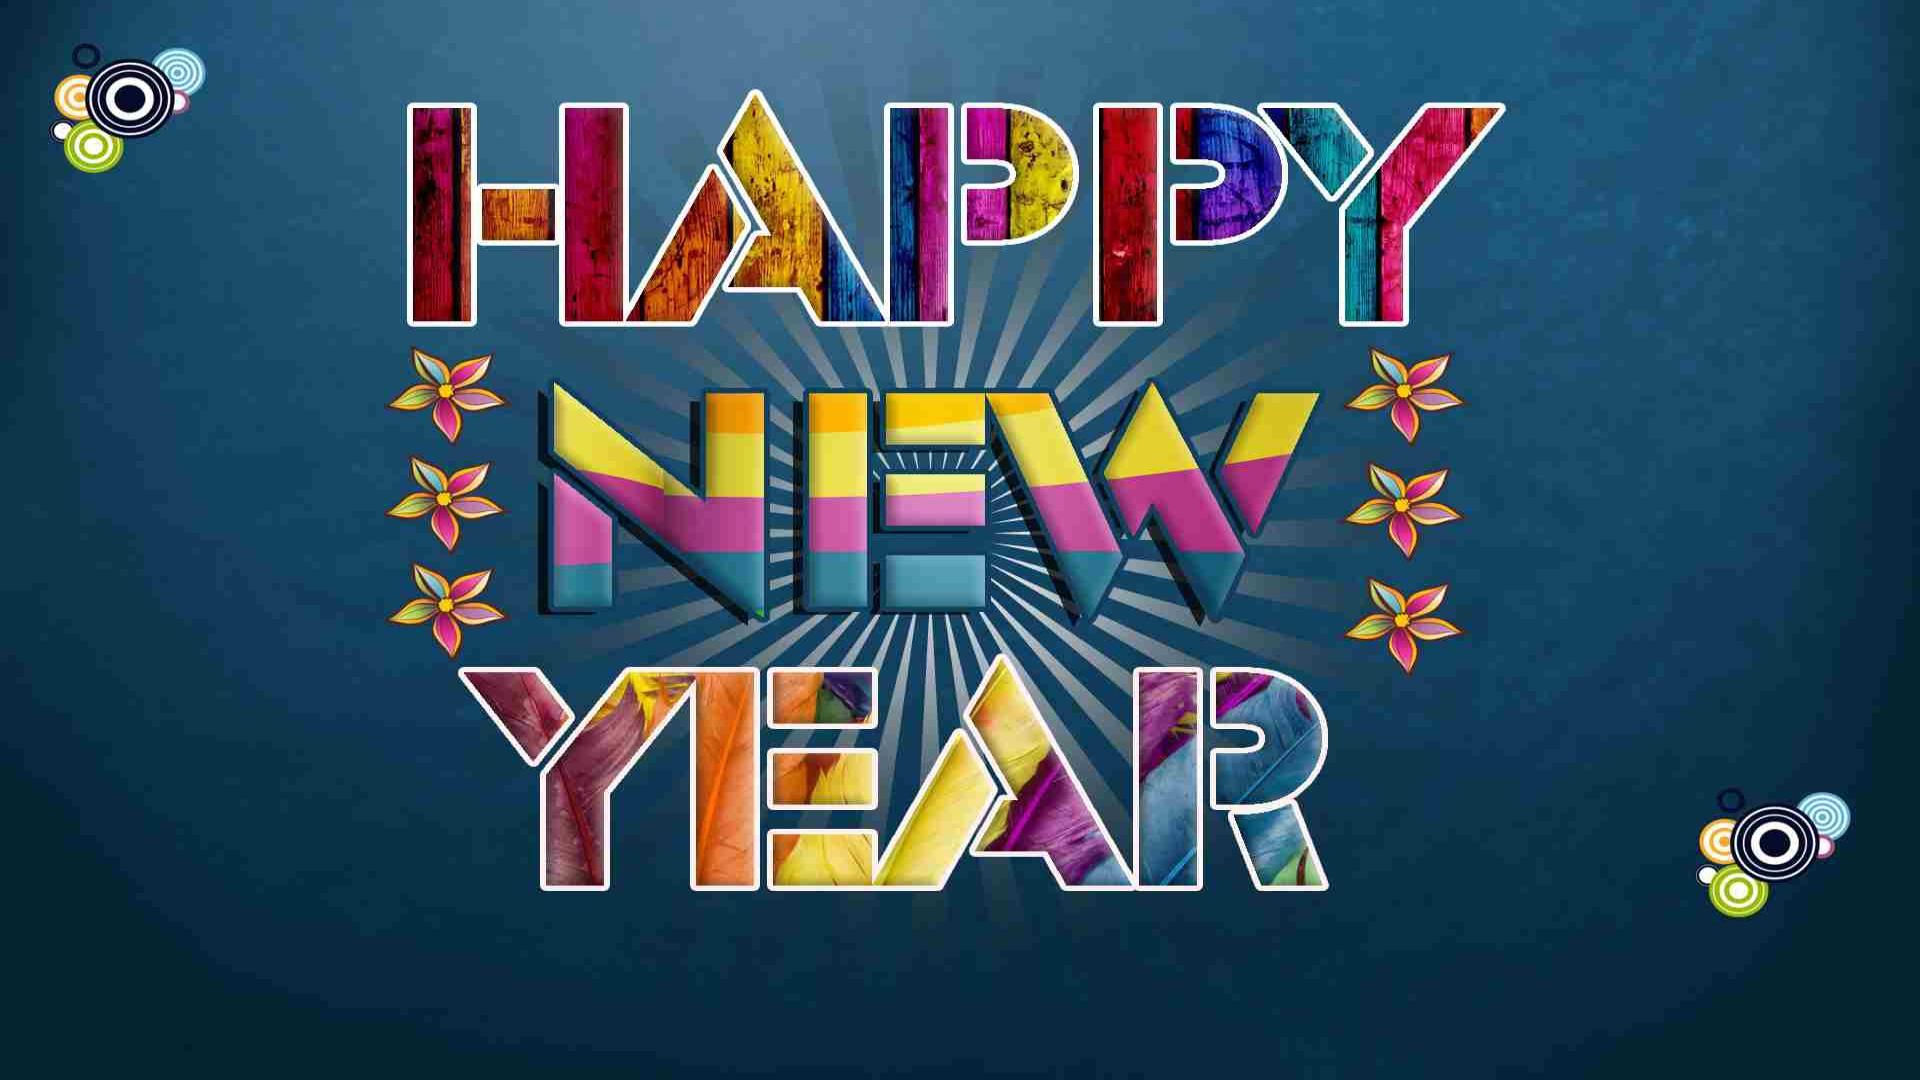 Happy New Year 2021 Full HD Wallpapers Download for PC